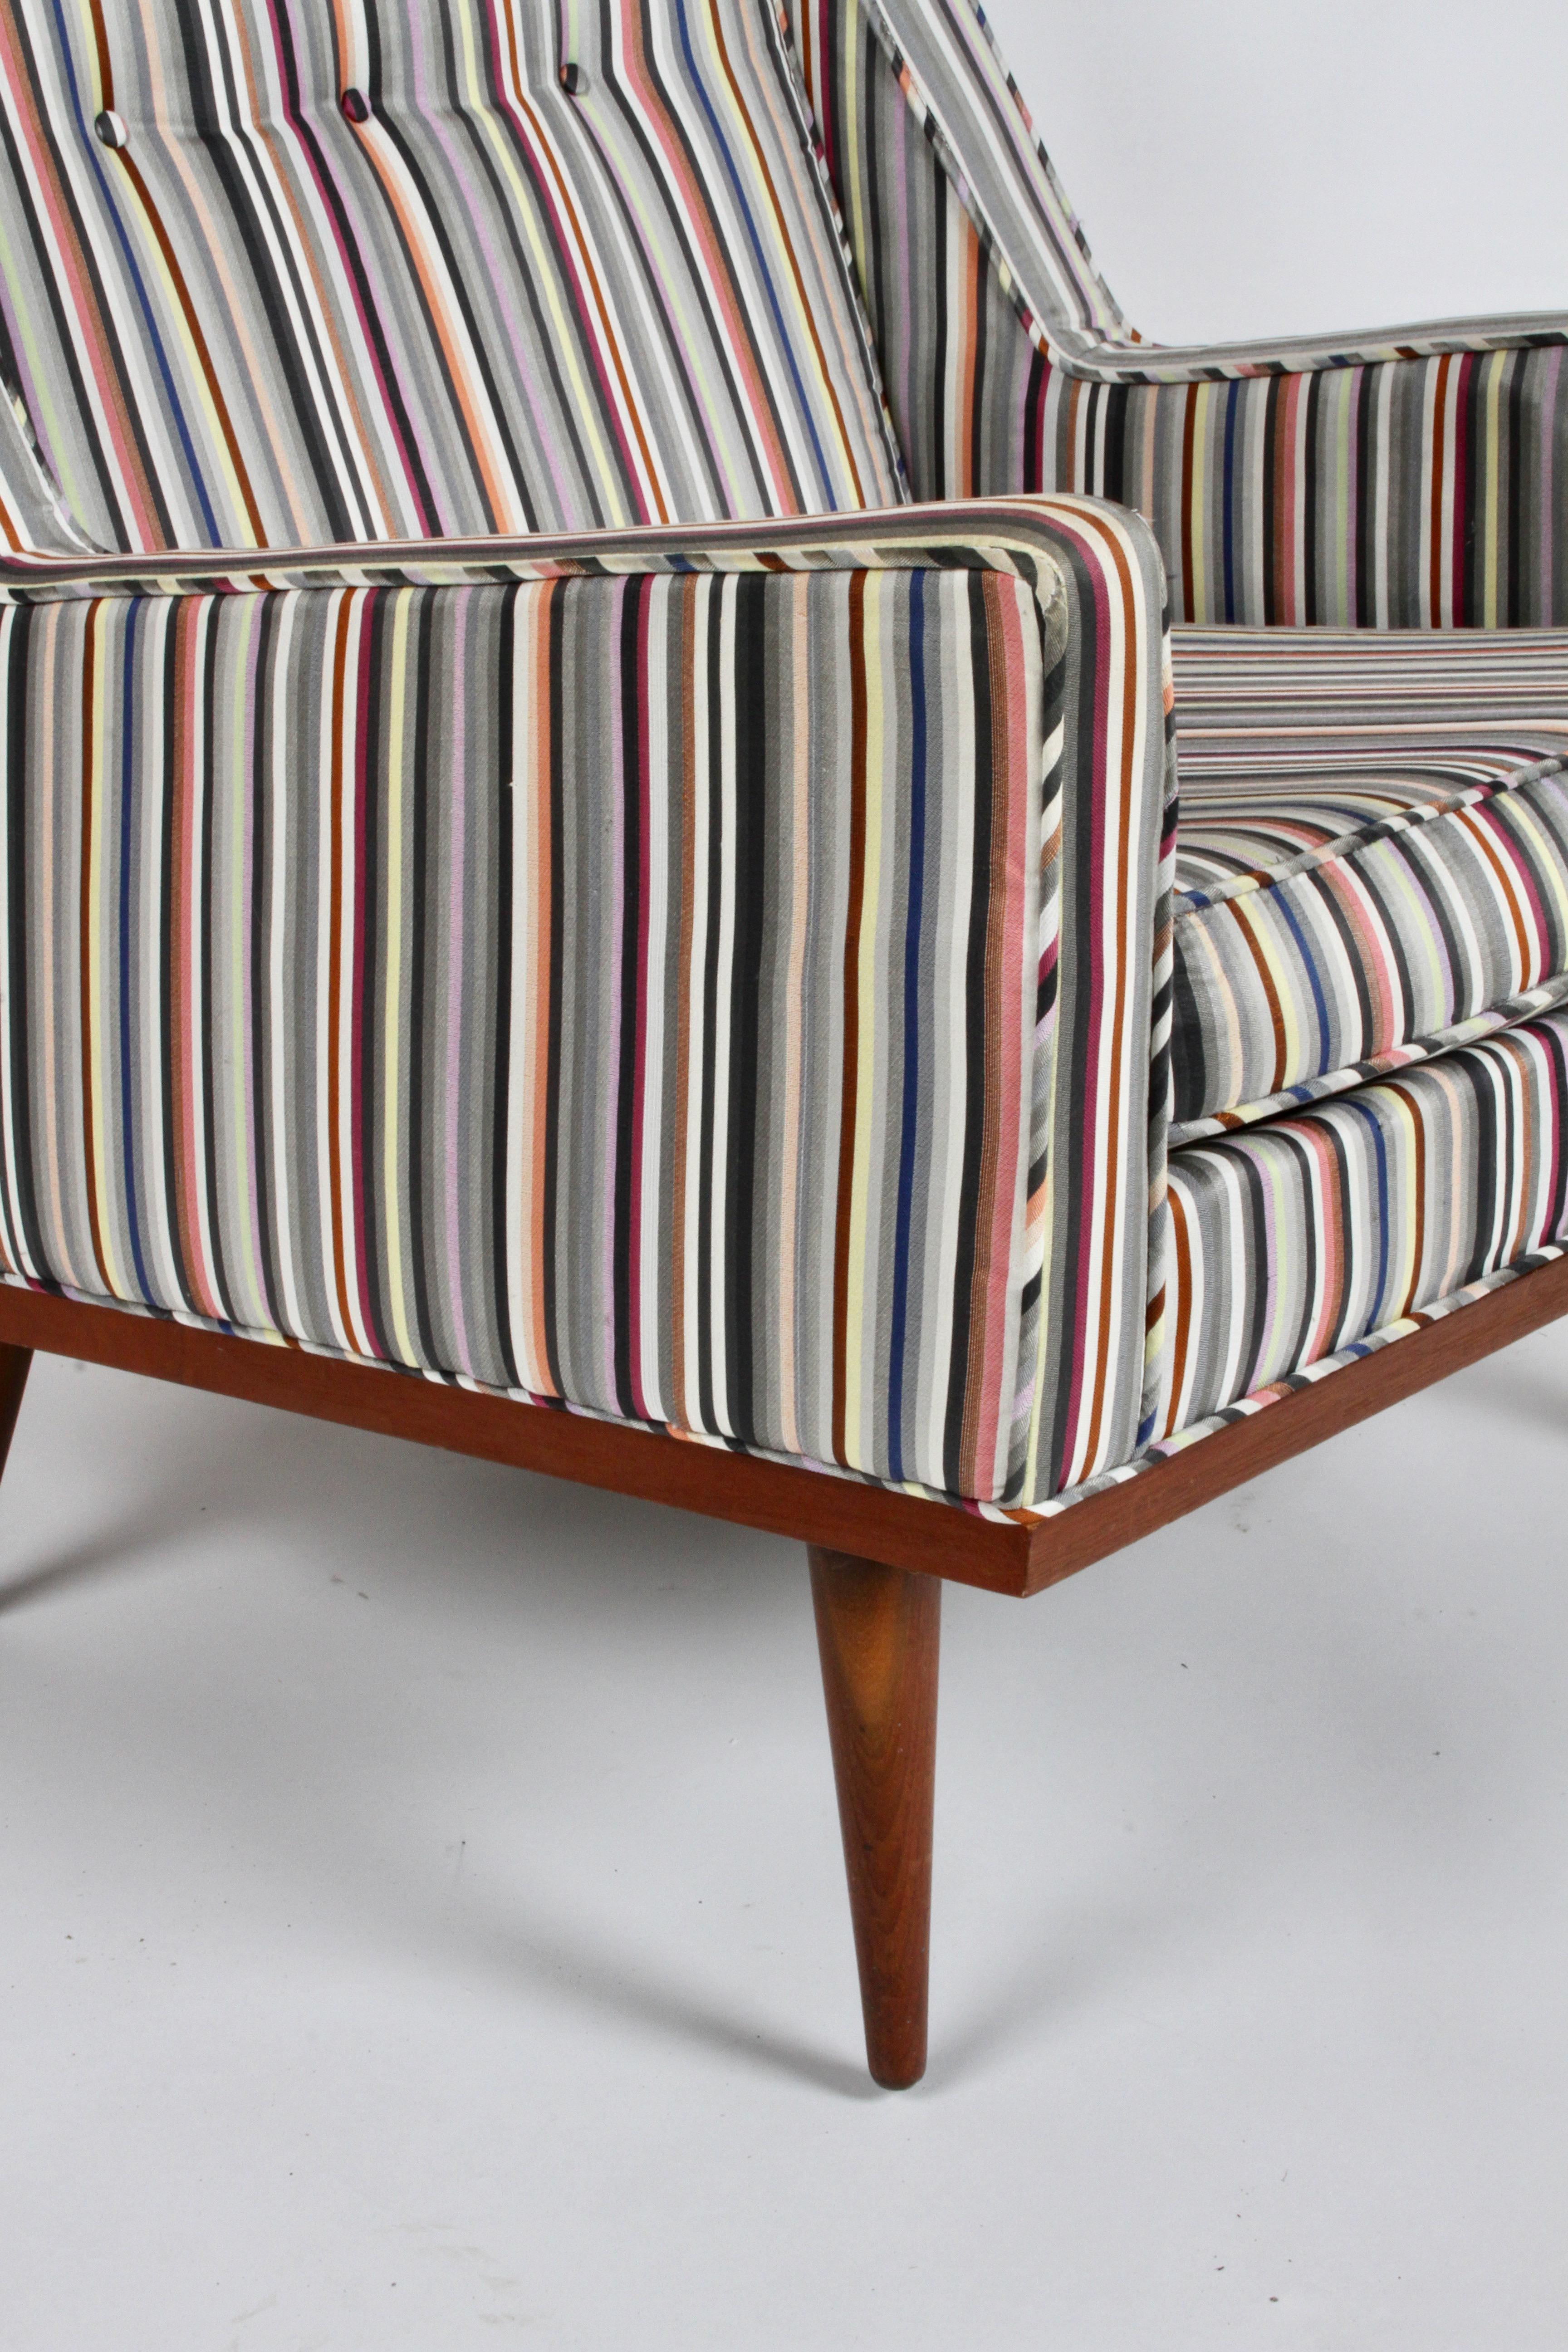 Milo Baughman for James Inc. Walnut with Stripe Lounge Chair For Sale 4